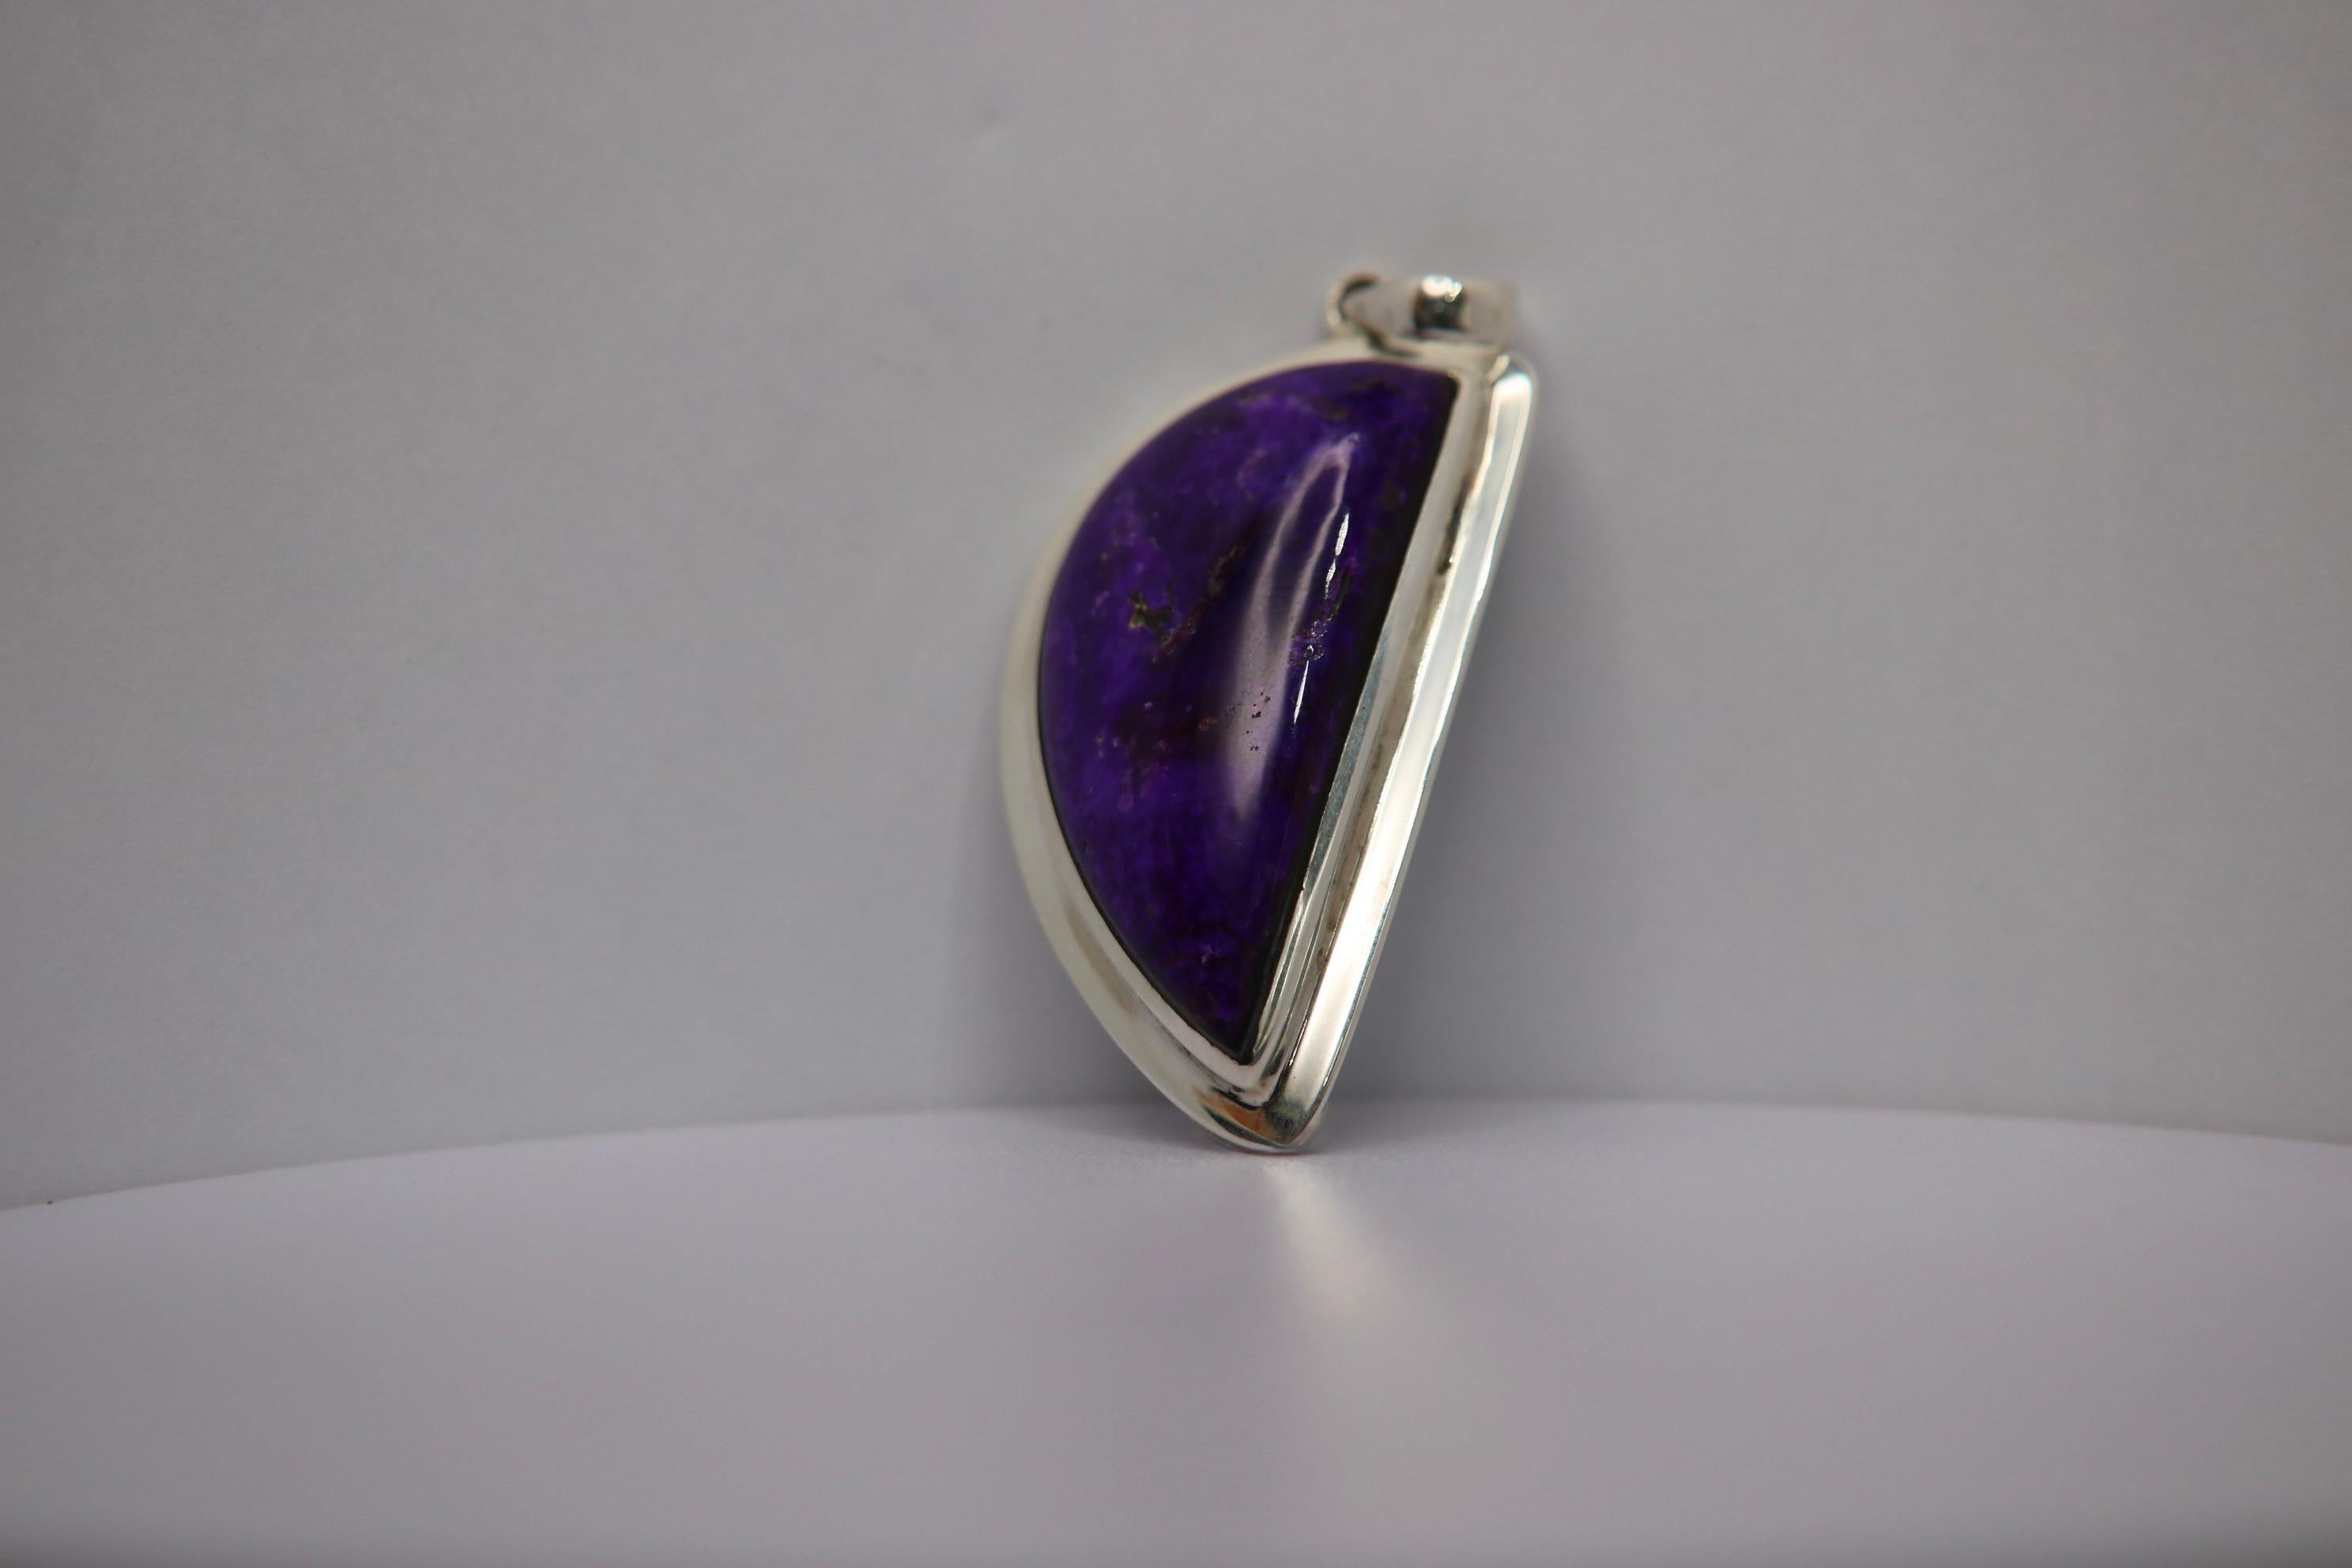 Handcrafted Sterling Silver Sugilite Pendant.

Sugilite, known for its rich purple color, is a rare gemstone that brings a touch of vibrant uniqueness to any collection. Originating primarily from Japan and South Africa, Sugilite ranges from deep